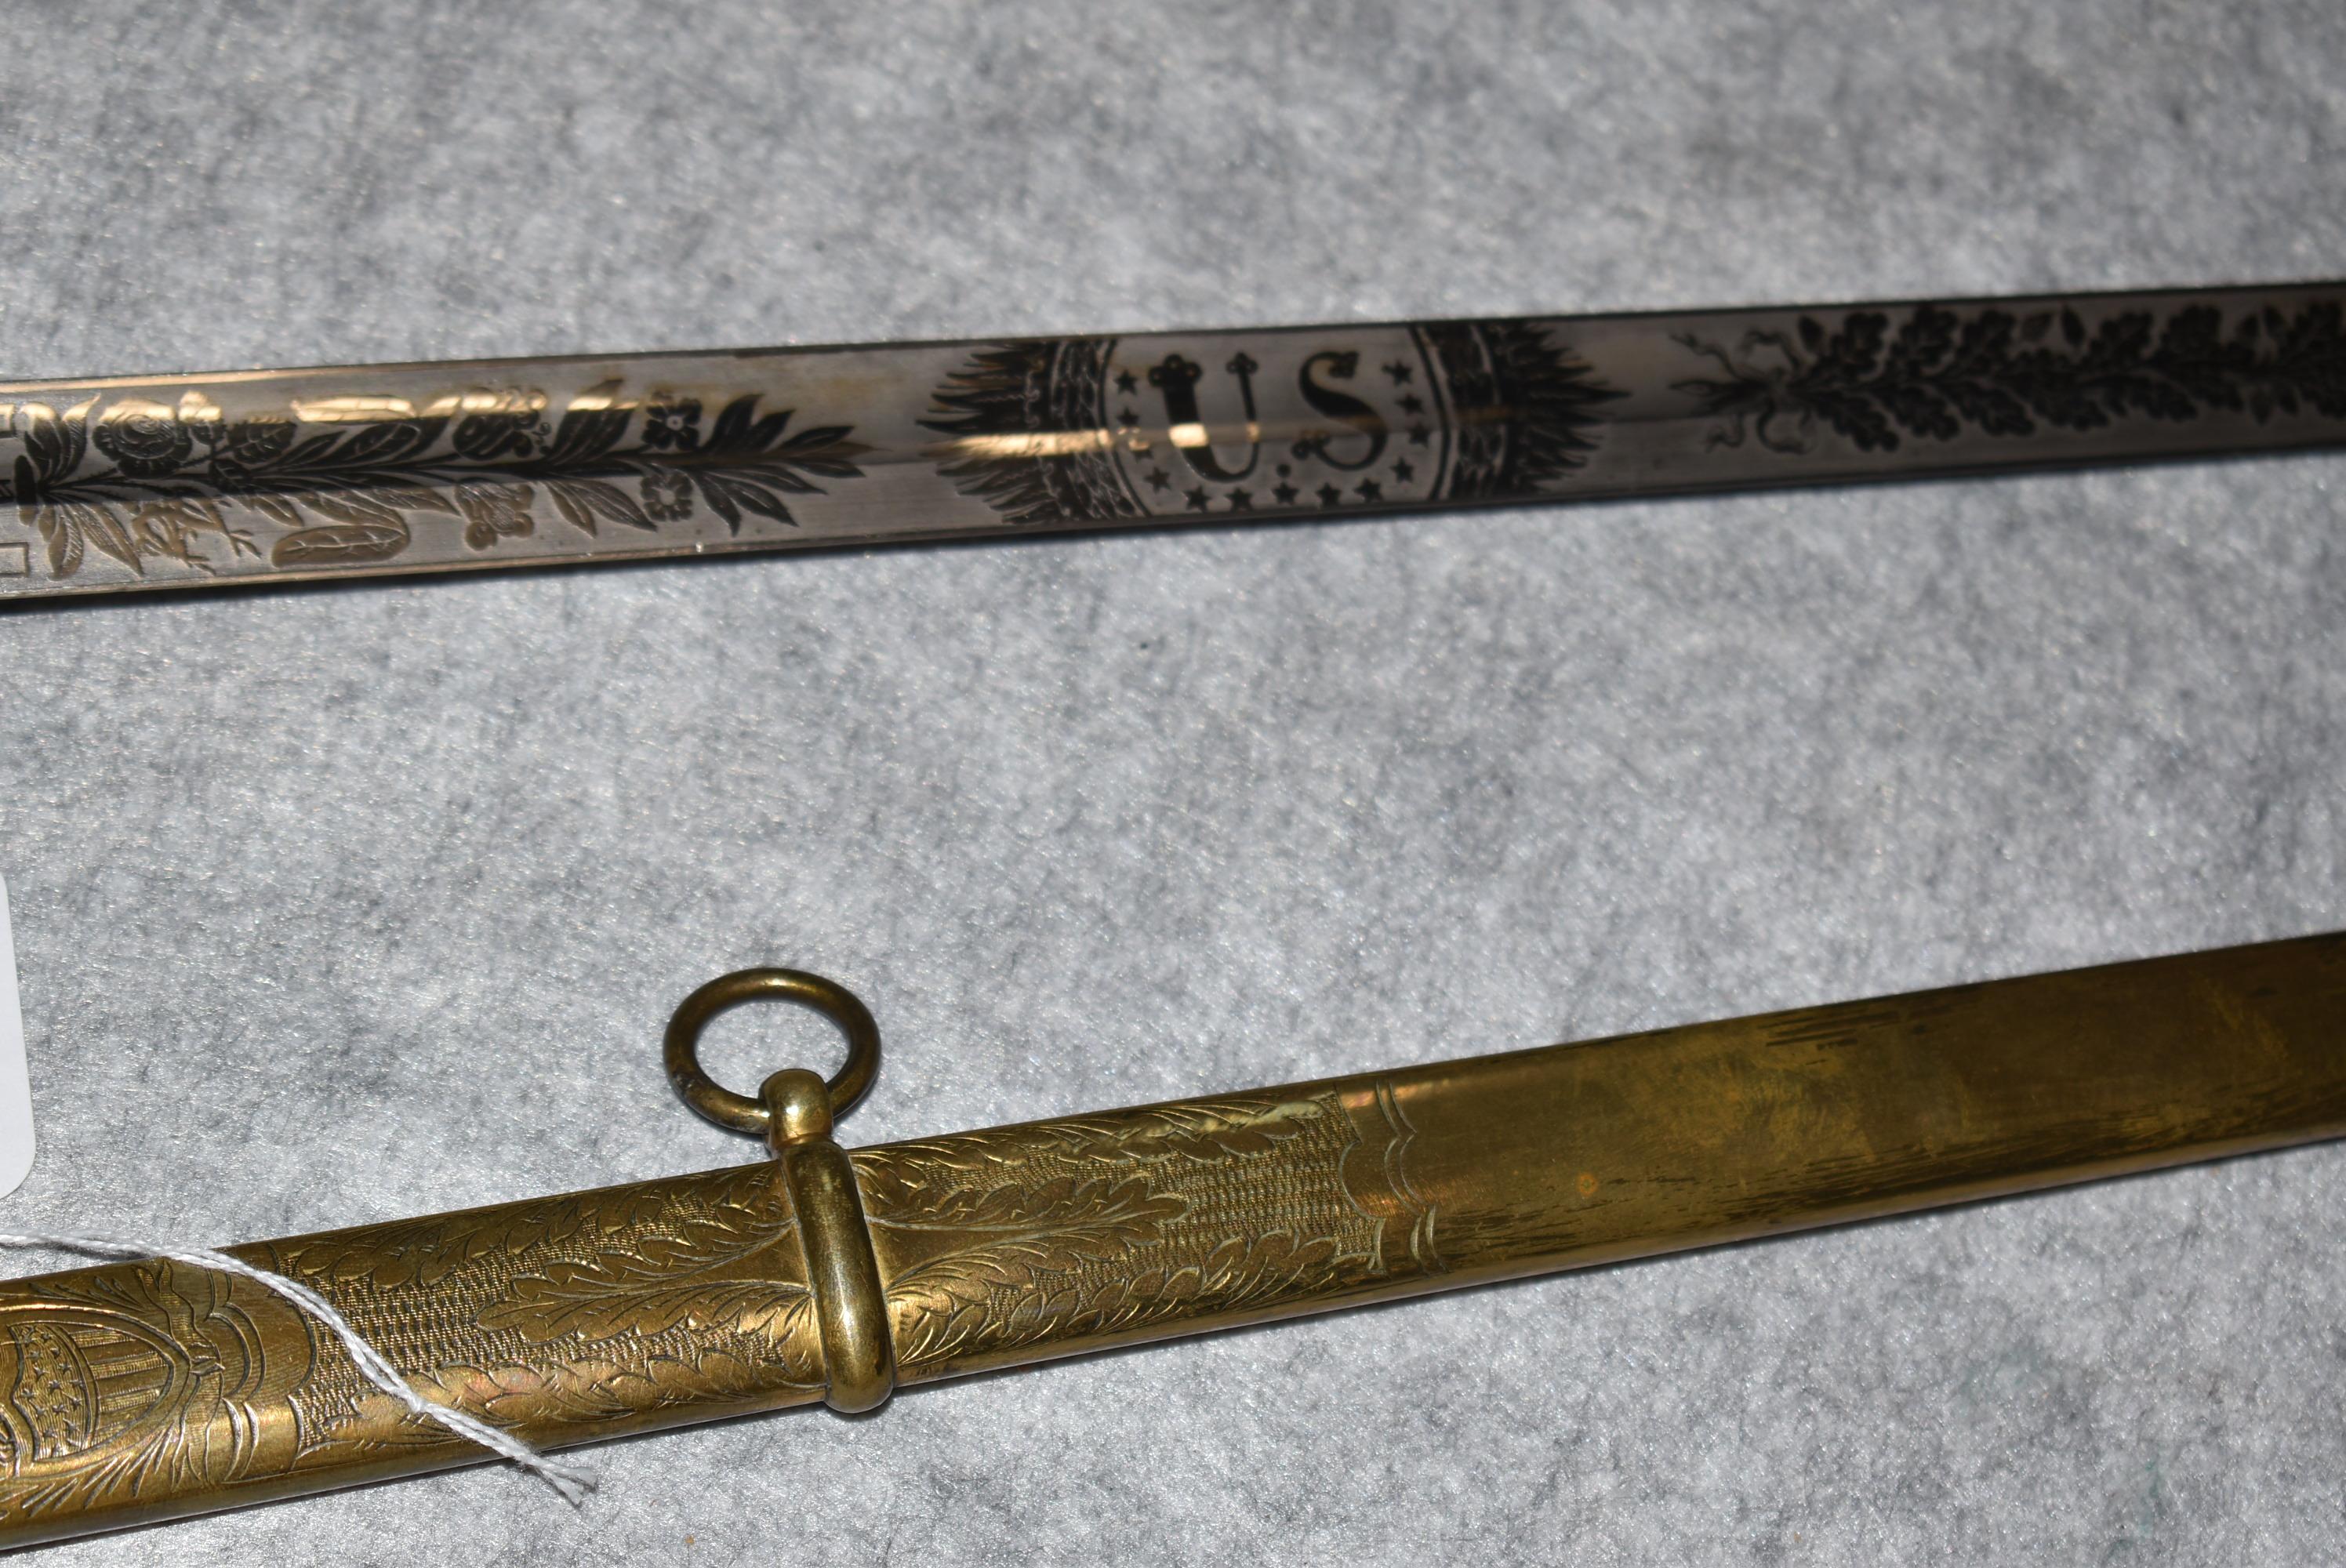 M1840 Foot Officer's sword and scabbard